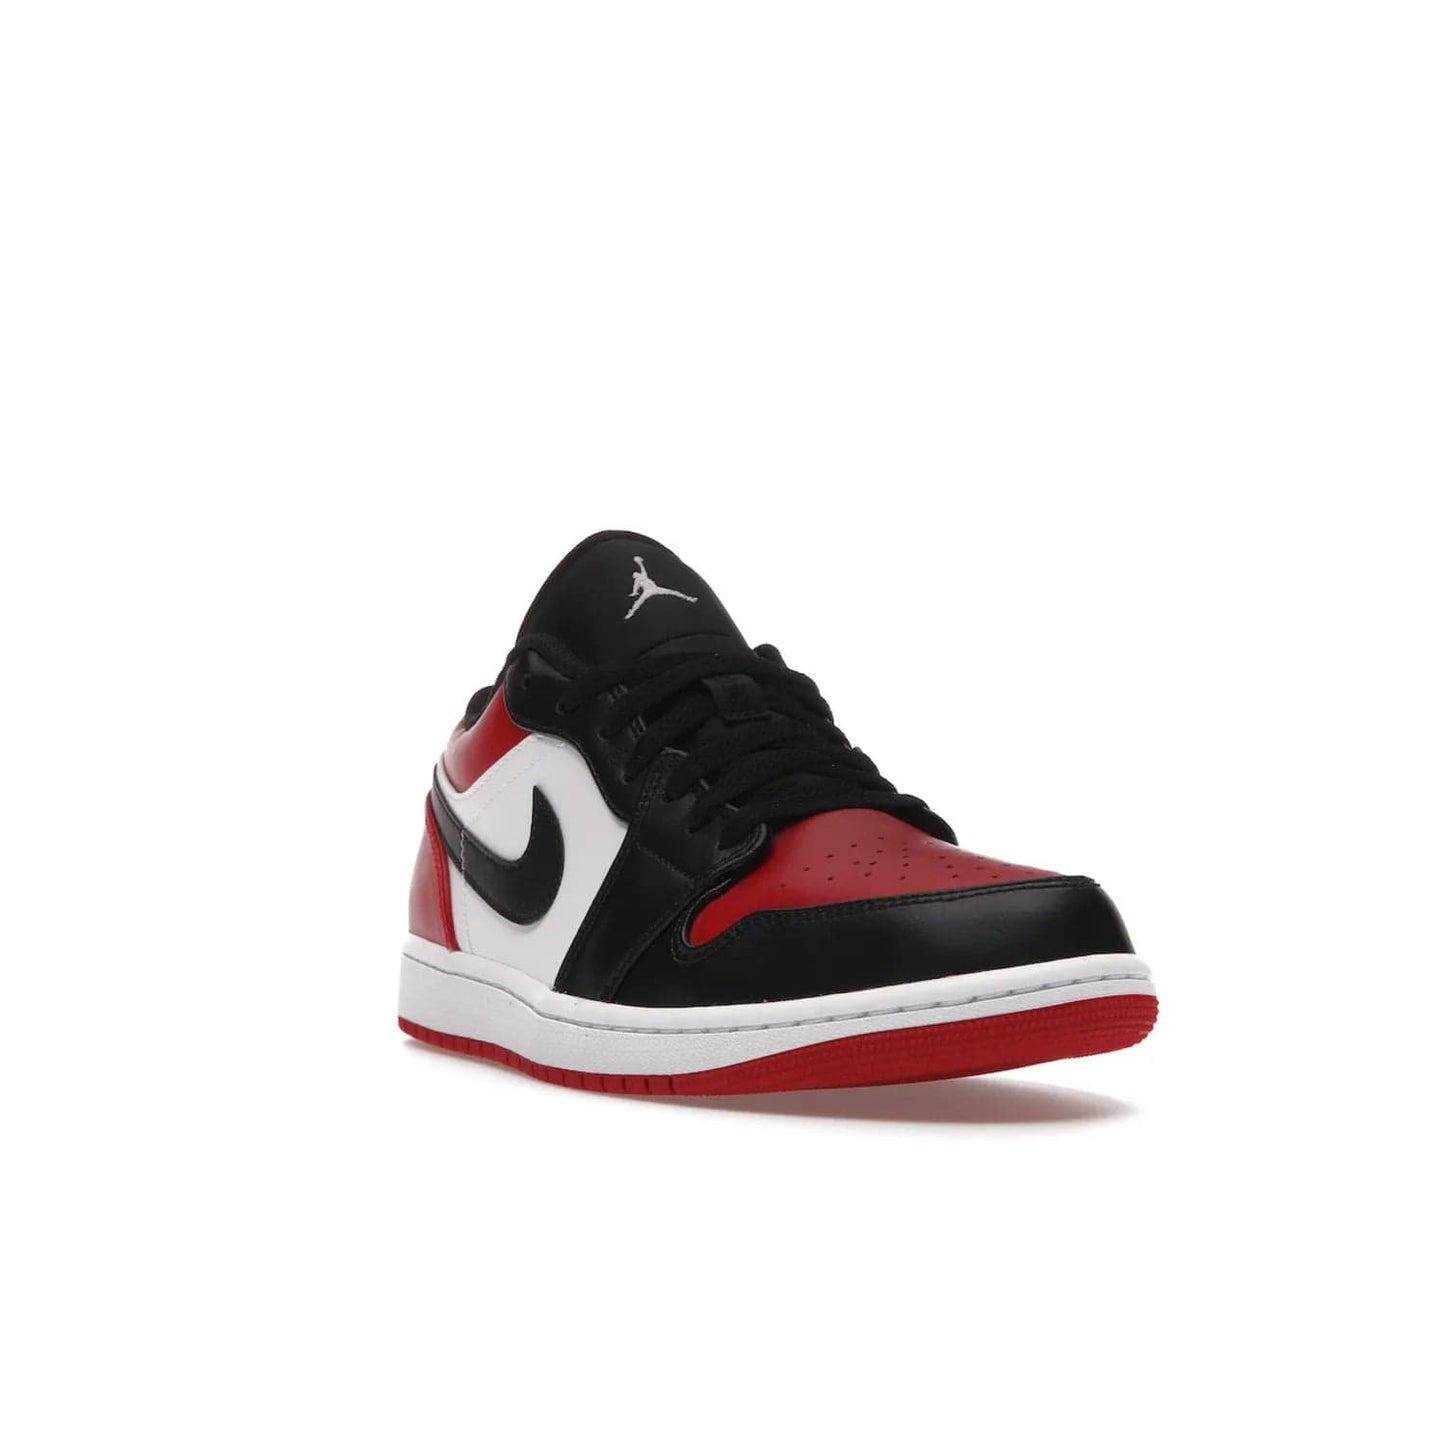 Jordan 1 Low Bred Toe - Image 7 - Only at www.BallersClubKickz.com - Step into the iconic Jordan 1 Retro. Mixing and matching of leather in red, black, and white makes for a unique colorway. Finished off with a Wing logo embroidery & Jumpman label. Comfortable and stylish at an affordable $100, the Jordan 1 Low Bred Toe is perfect for any true sneaker fan.